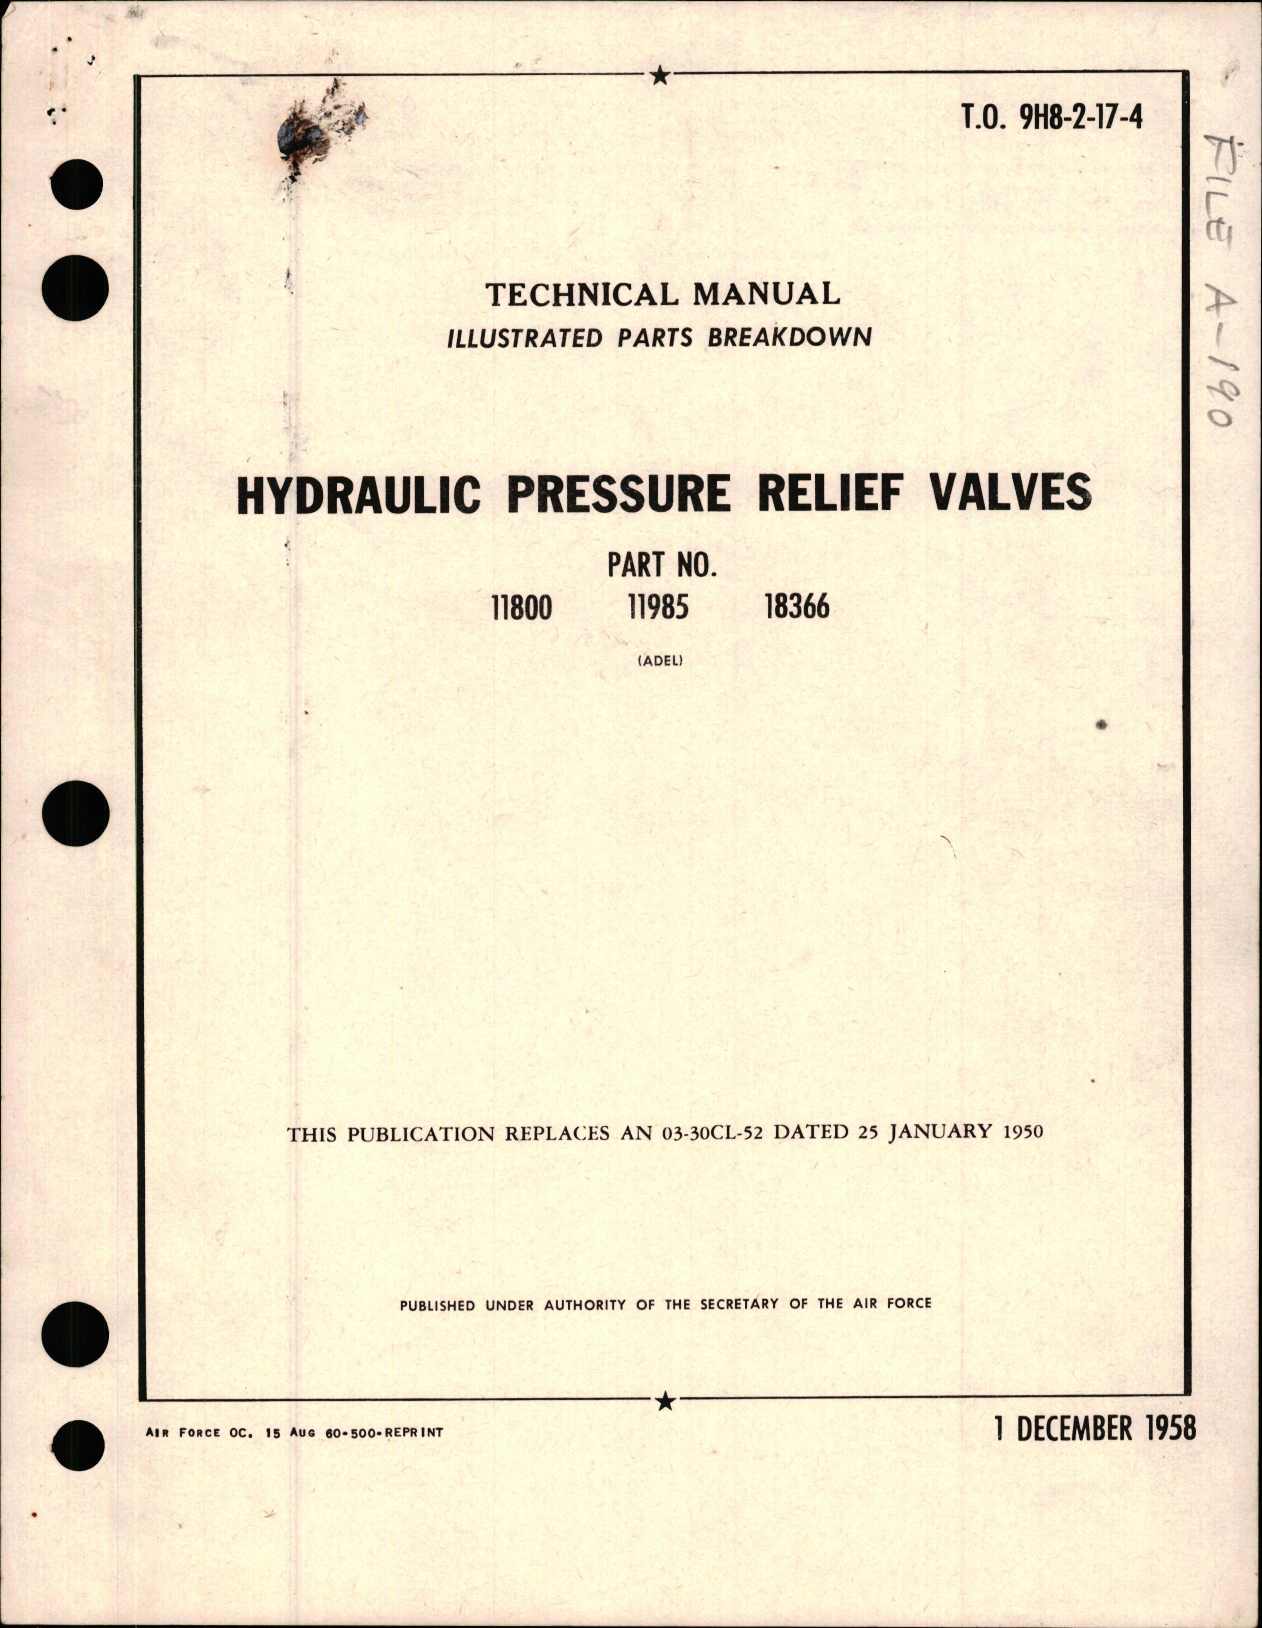 Sample page 1 from AirCorps Library document: Illustrated Parts Breakdown for Hydraulic Pressure Relief Valves - Parts 11800, 12985, and 18366